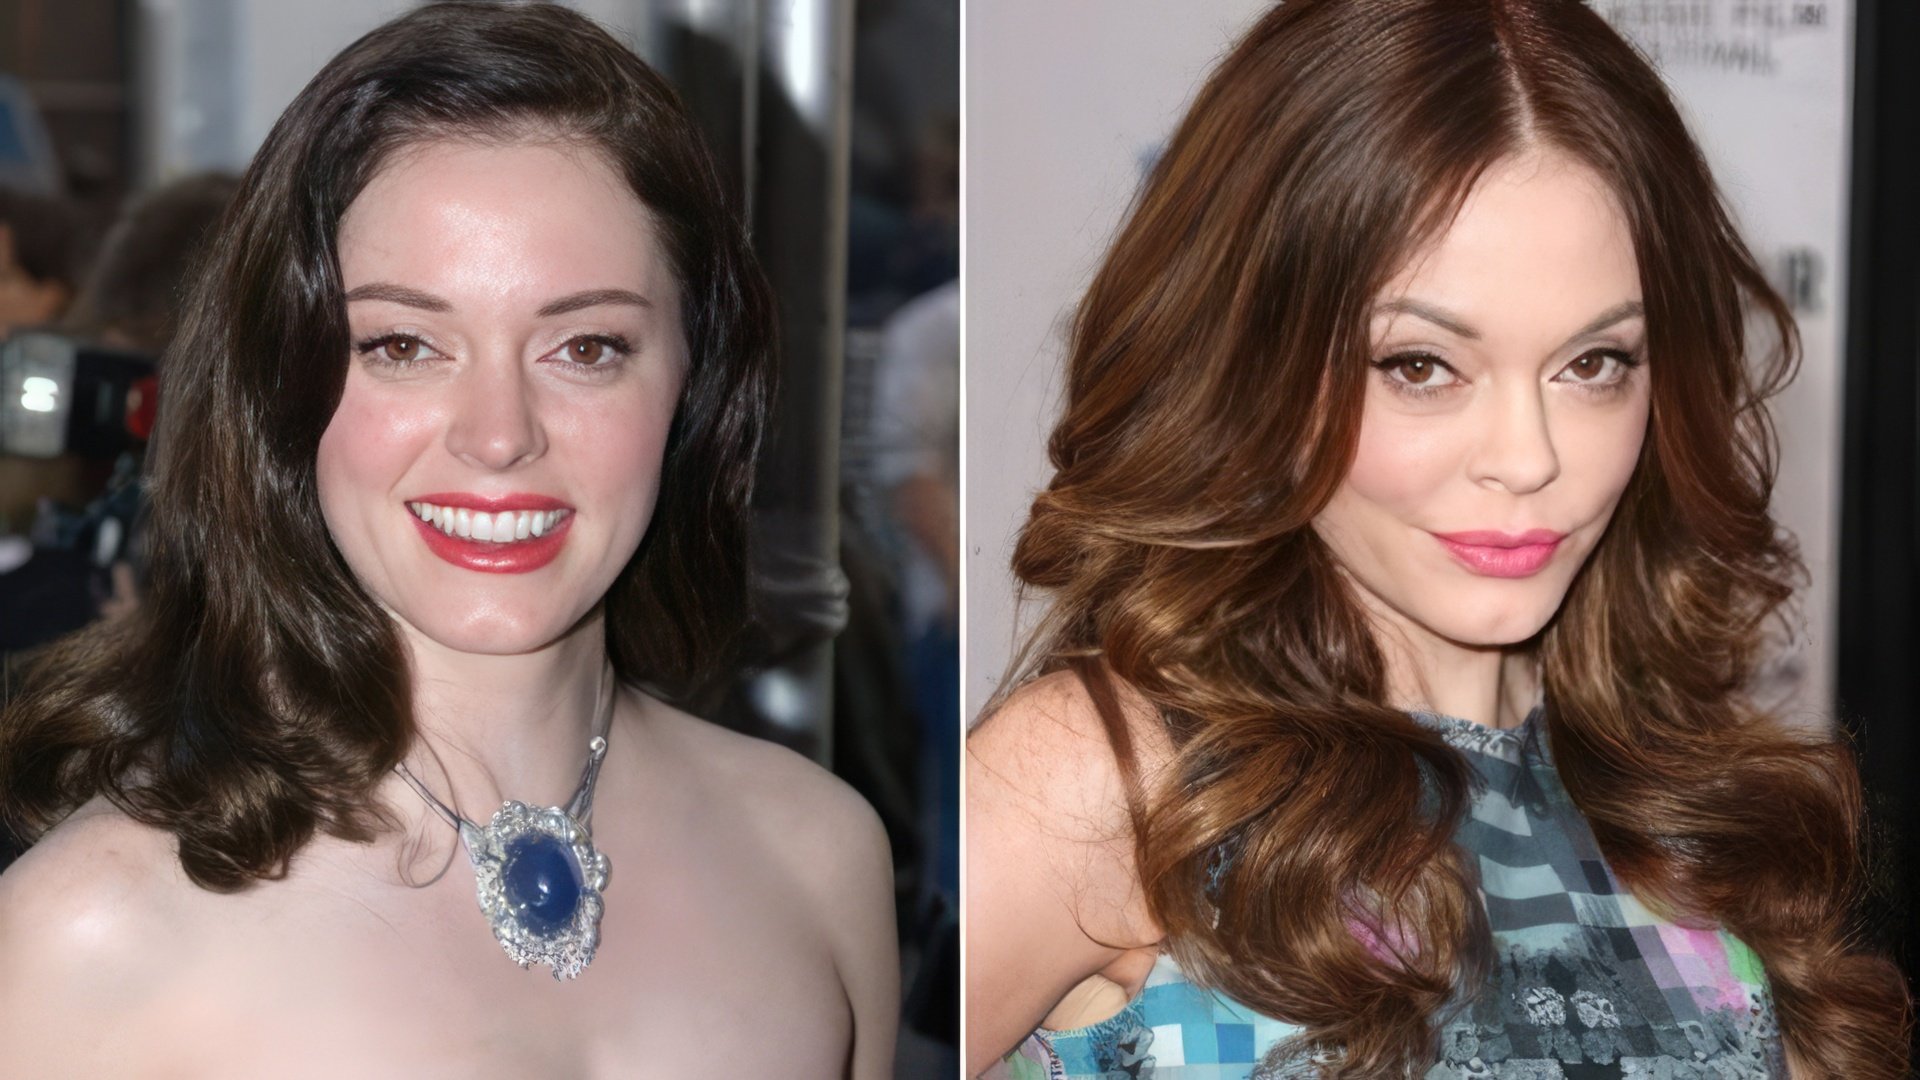 Rose McGowan before and after the accident